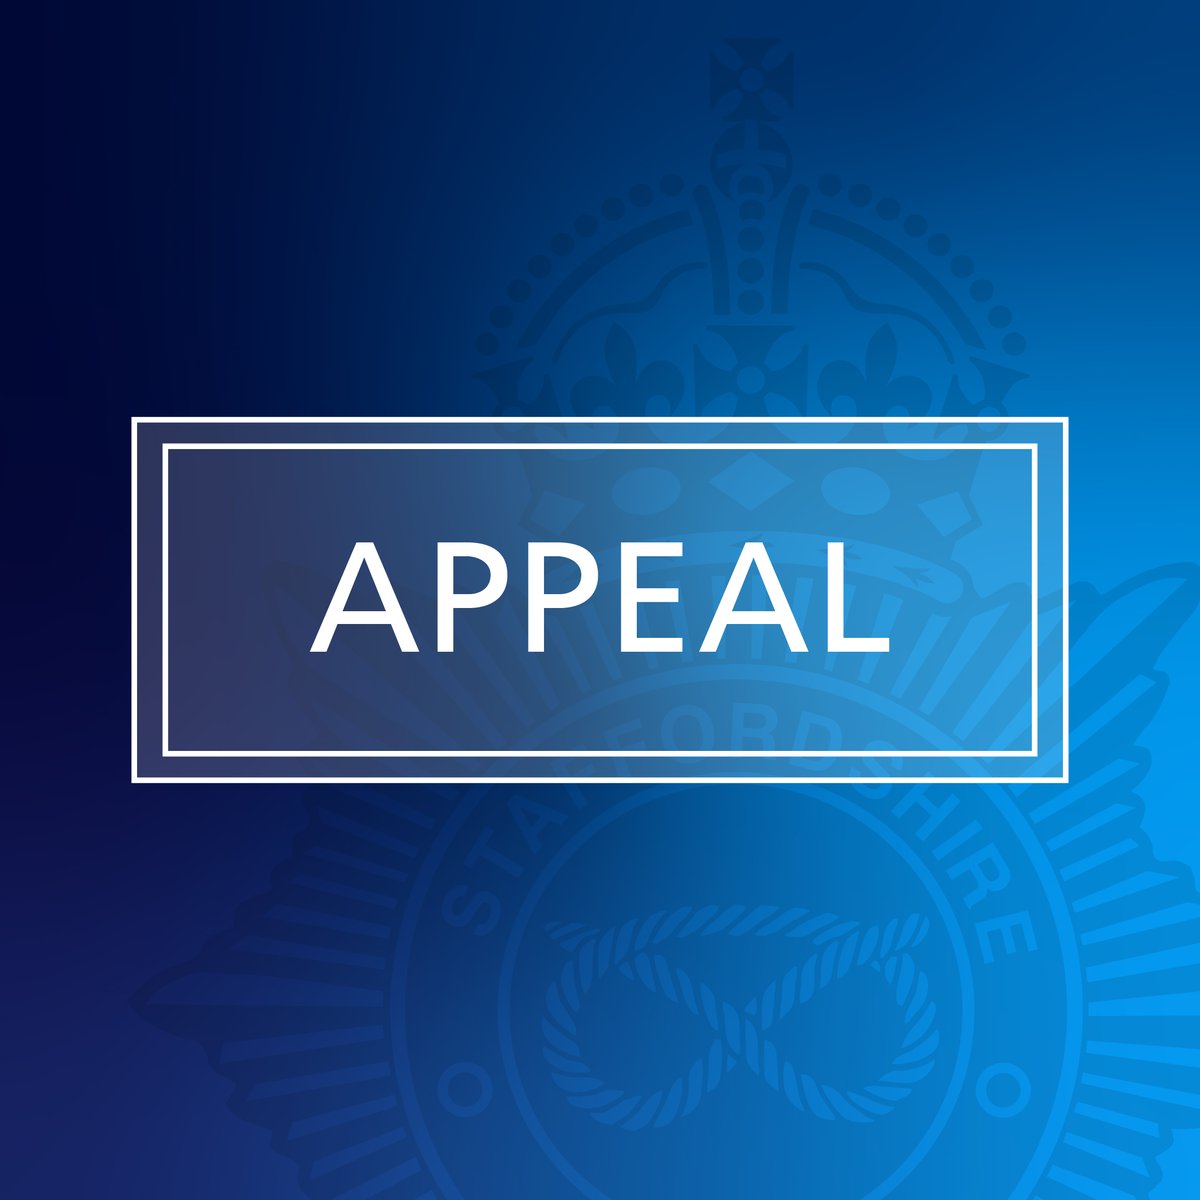 Officers are appealing for information after a cat was killed in Tamworth. Read more: orlo.uk/DebLe